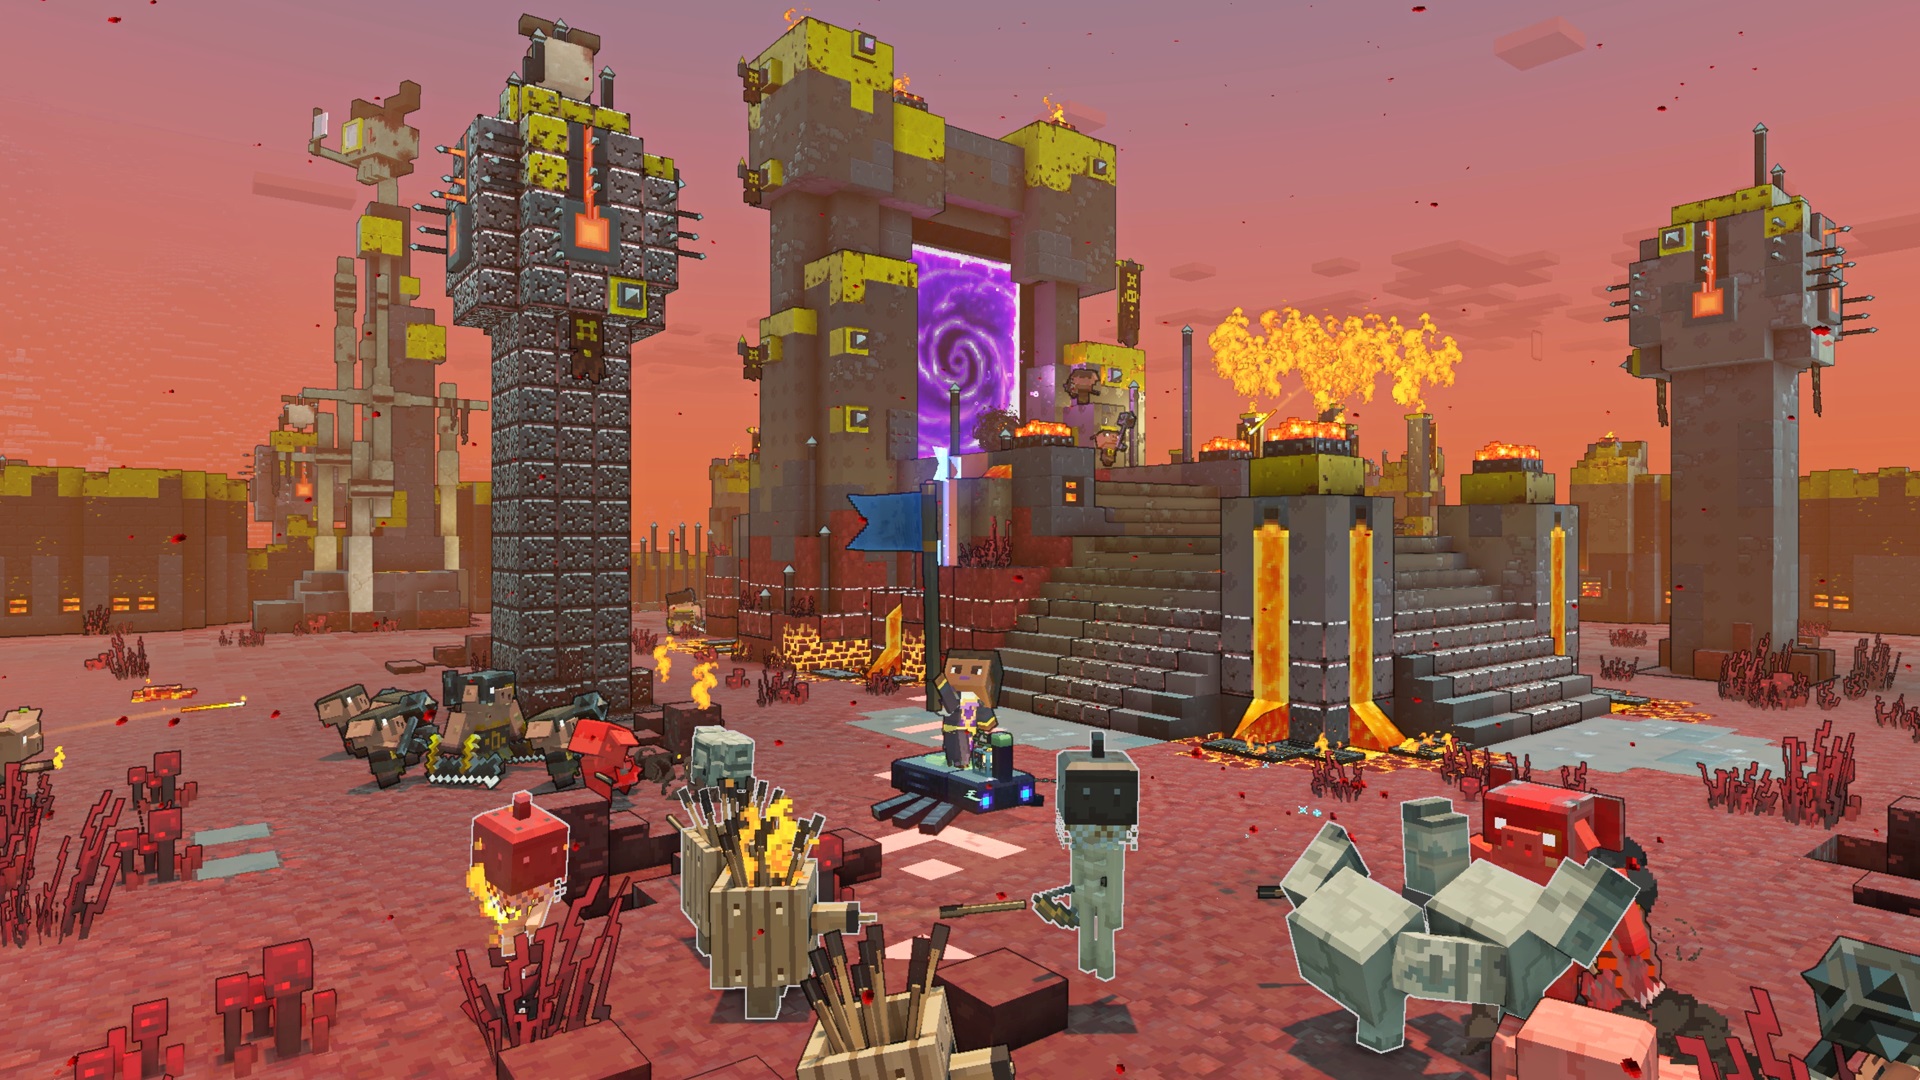 Minecraft Legends player character in an underworld raises a flag to summon mafia allies.